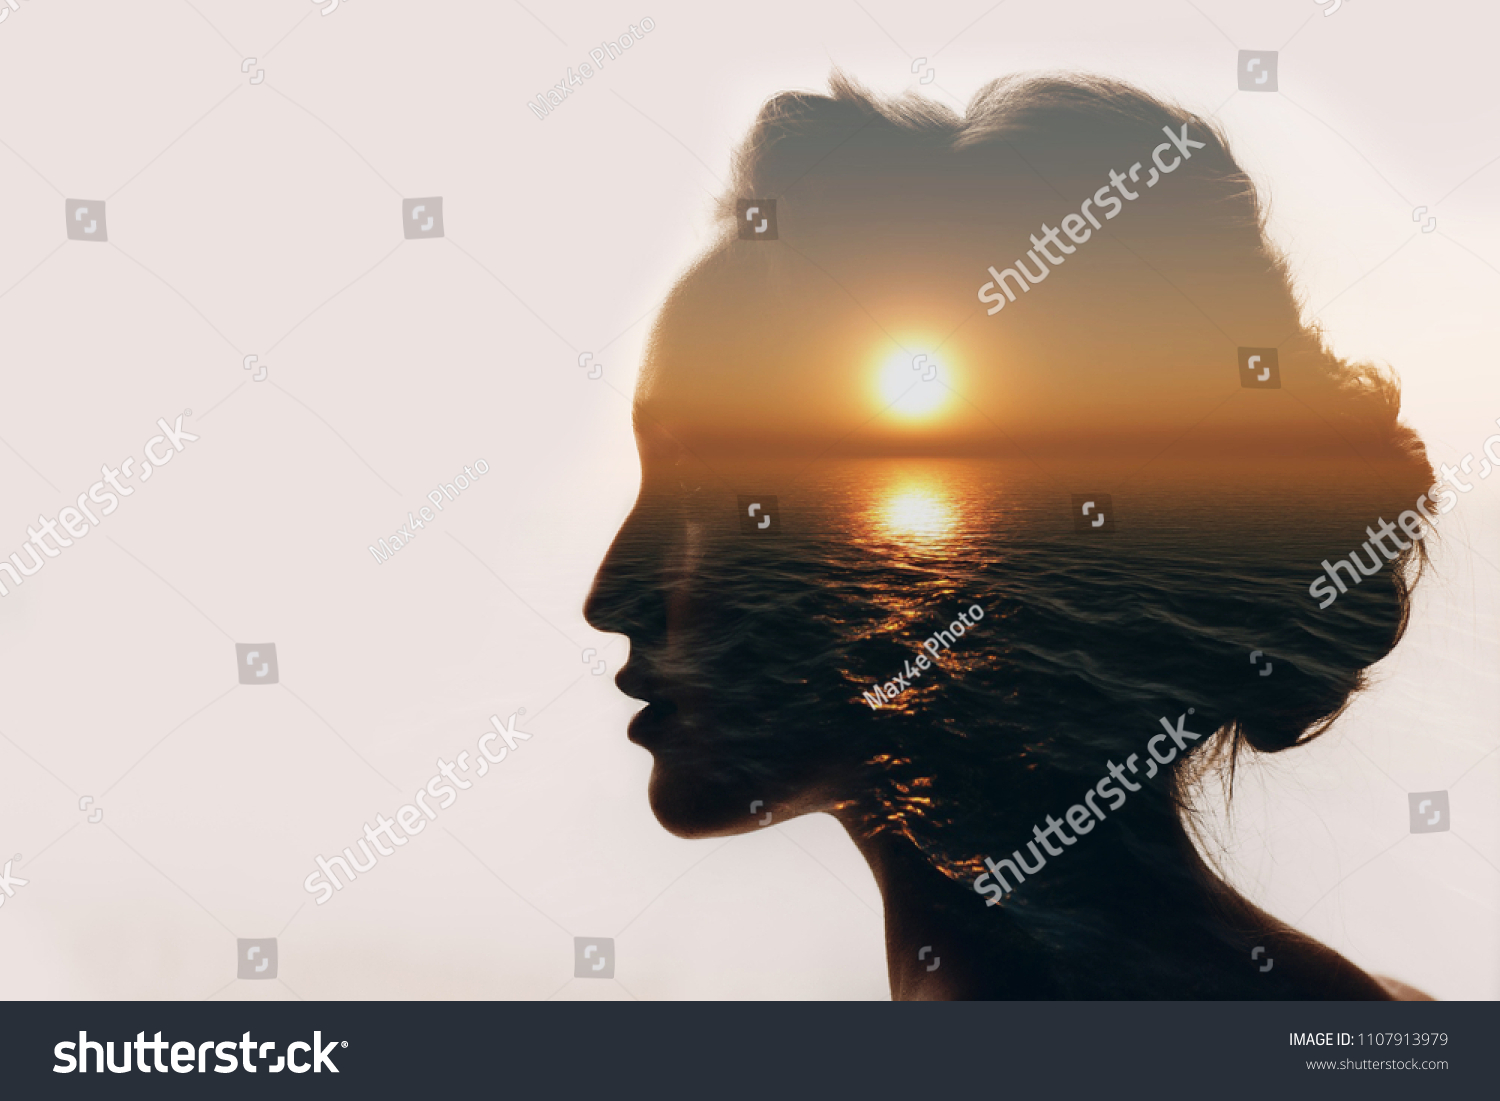 Psychology concept. Sunrise and dreamer woman silhouette. #1107913979